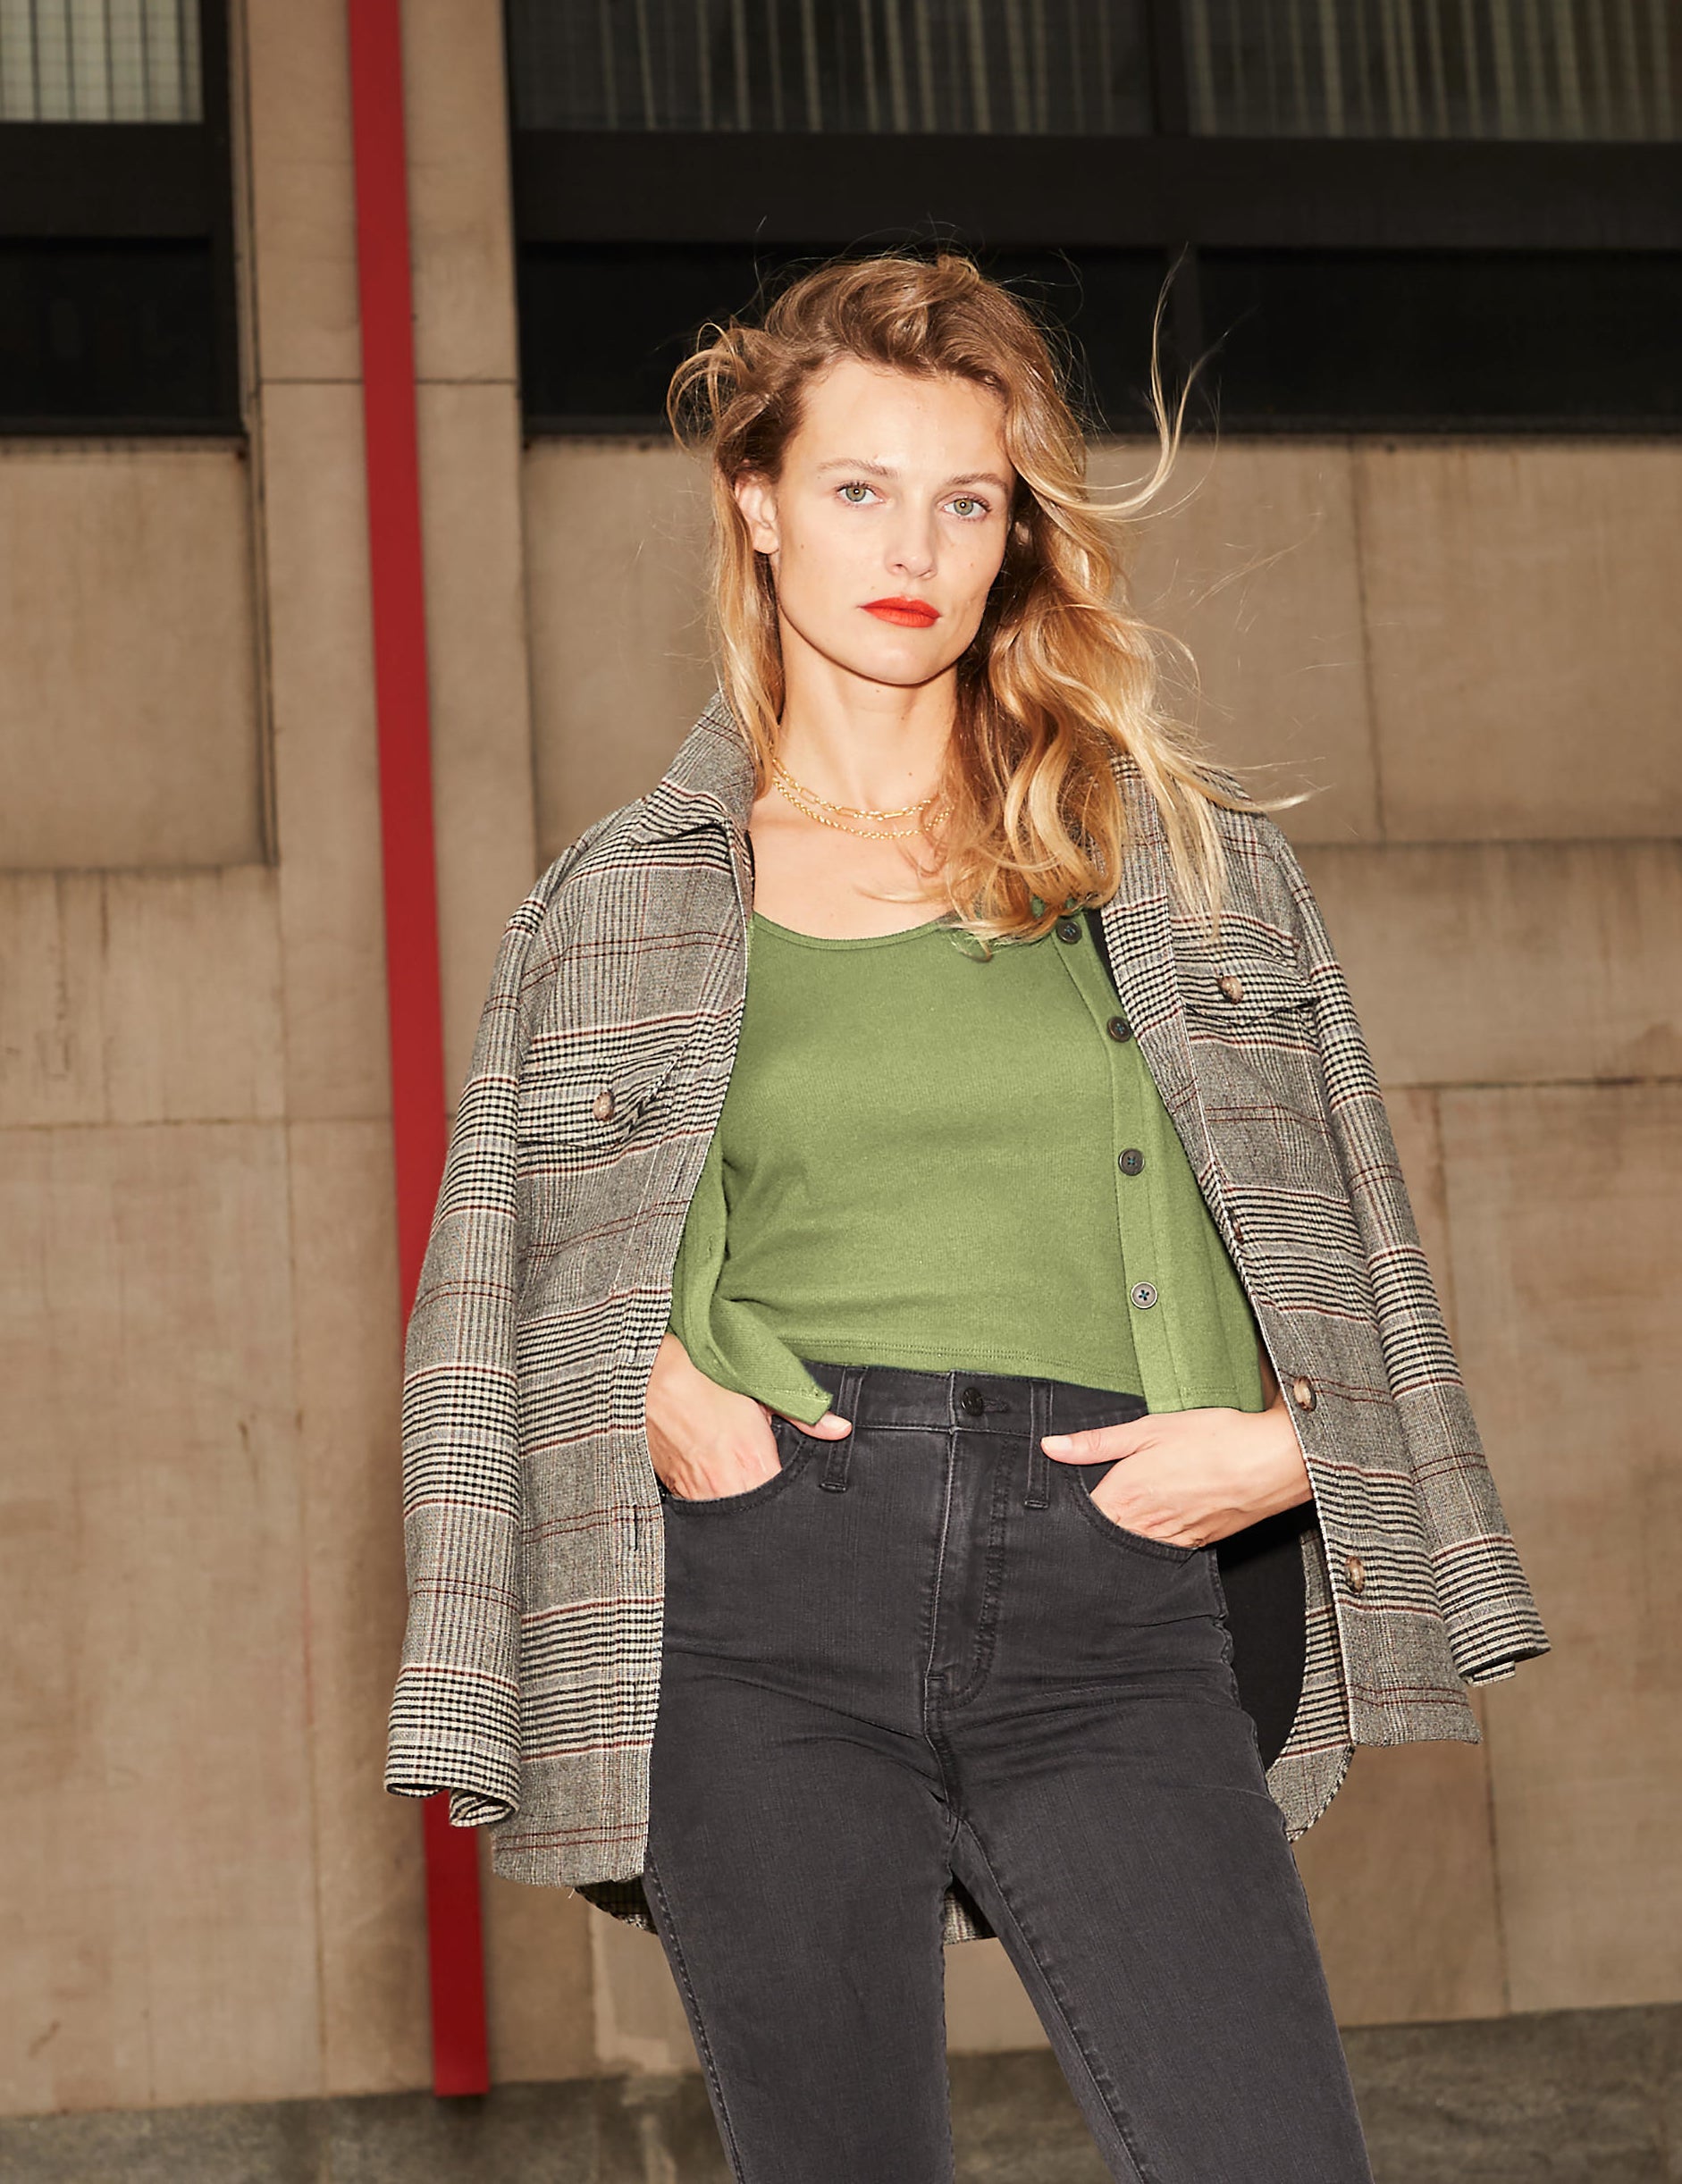 model wearing the brown, beige, and red plaid jacket